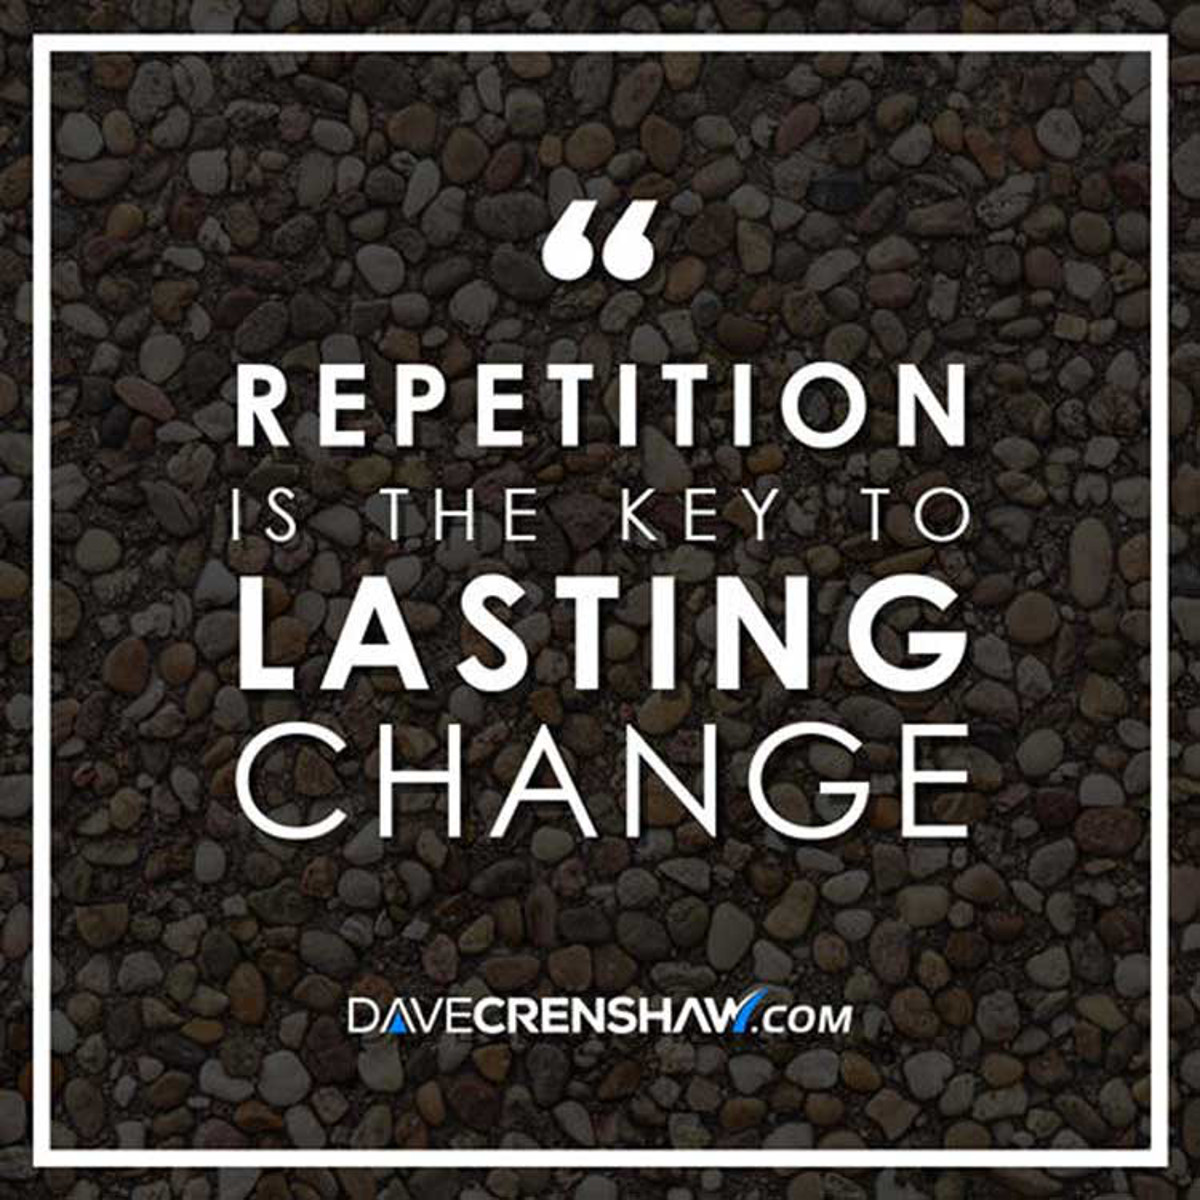 Repetition is the key to lasting change